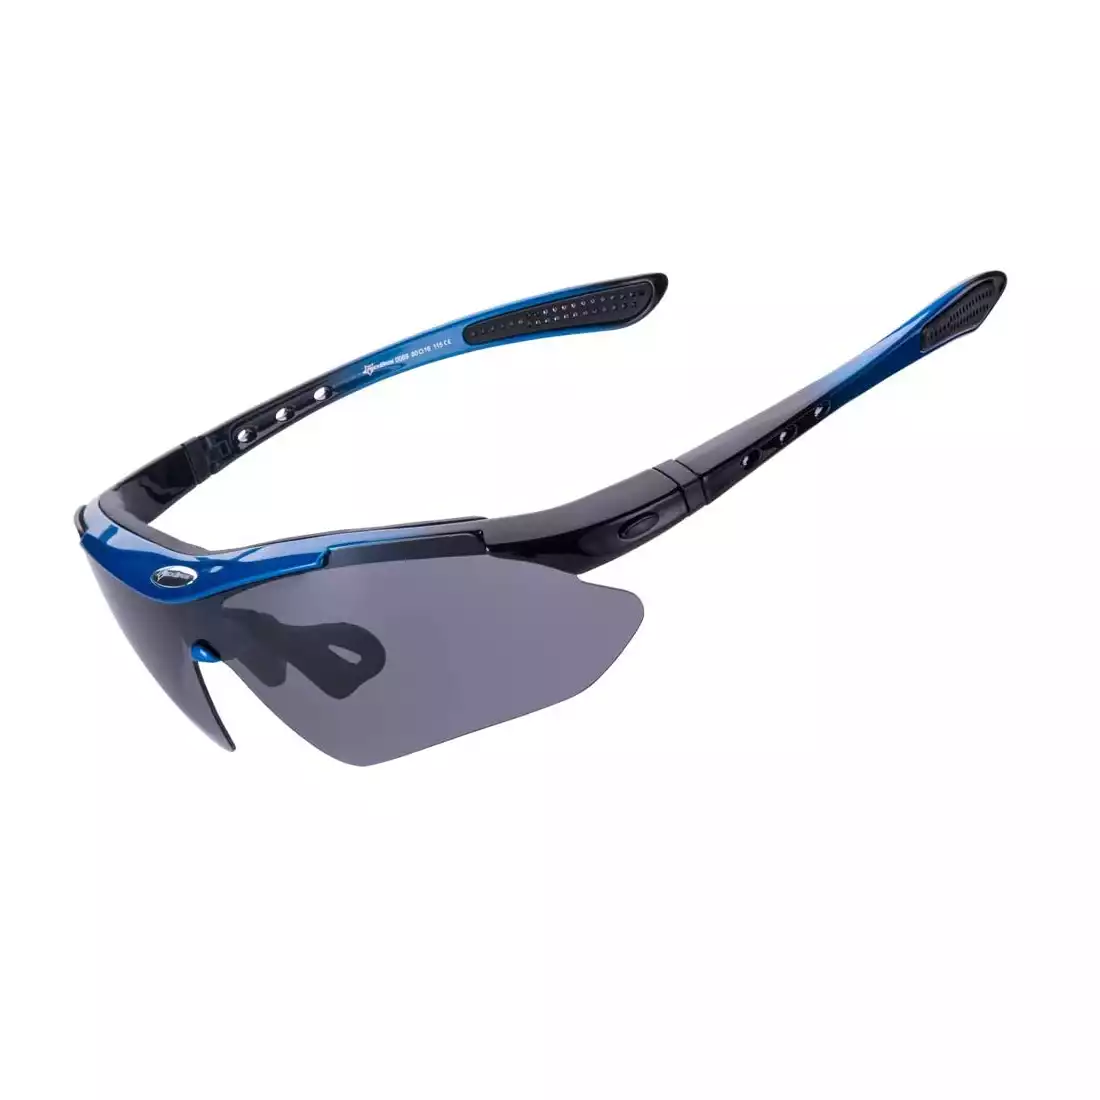 RockBros 10007 bicycle / sports goggles with polarized 5 interchangeable lenses blue